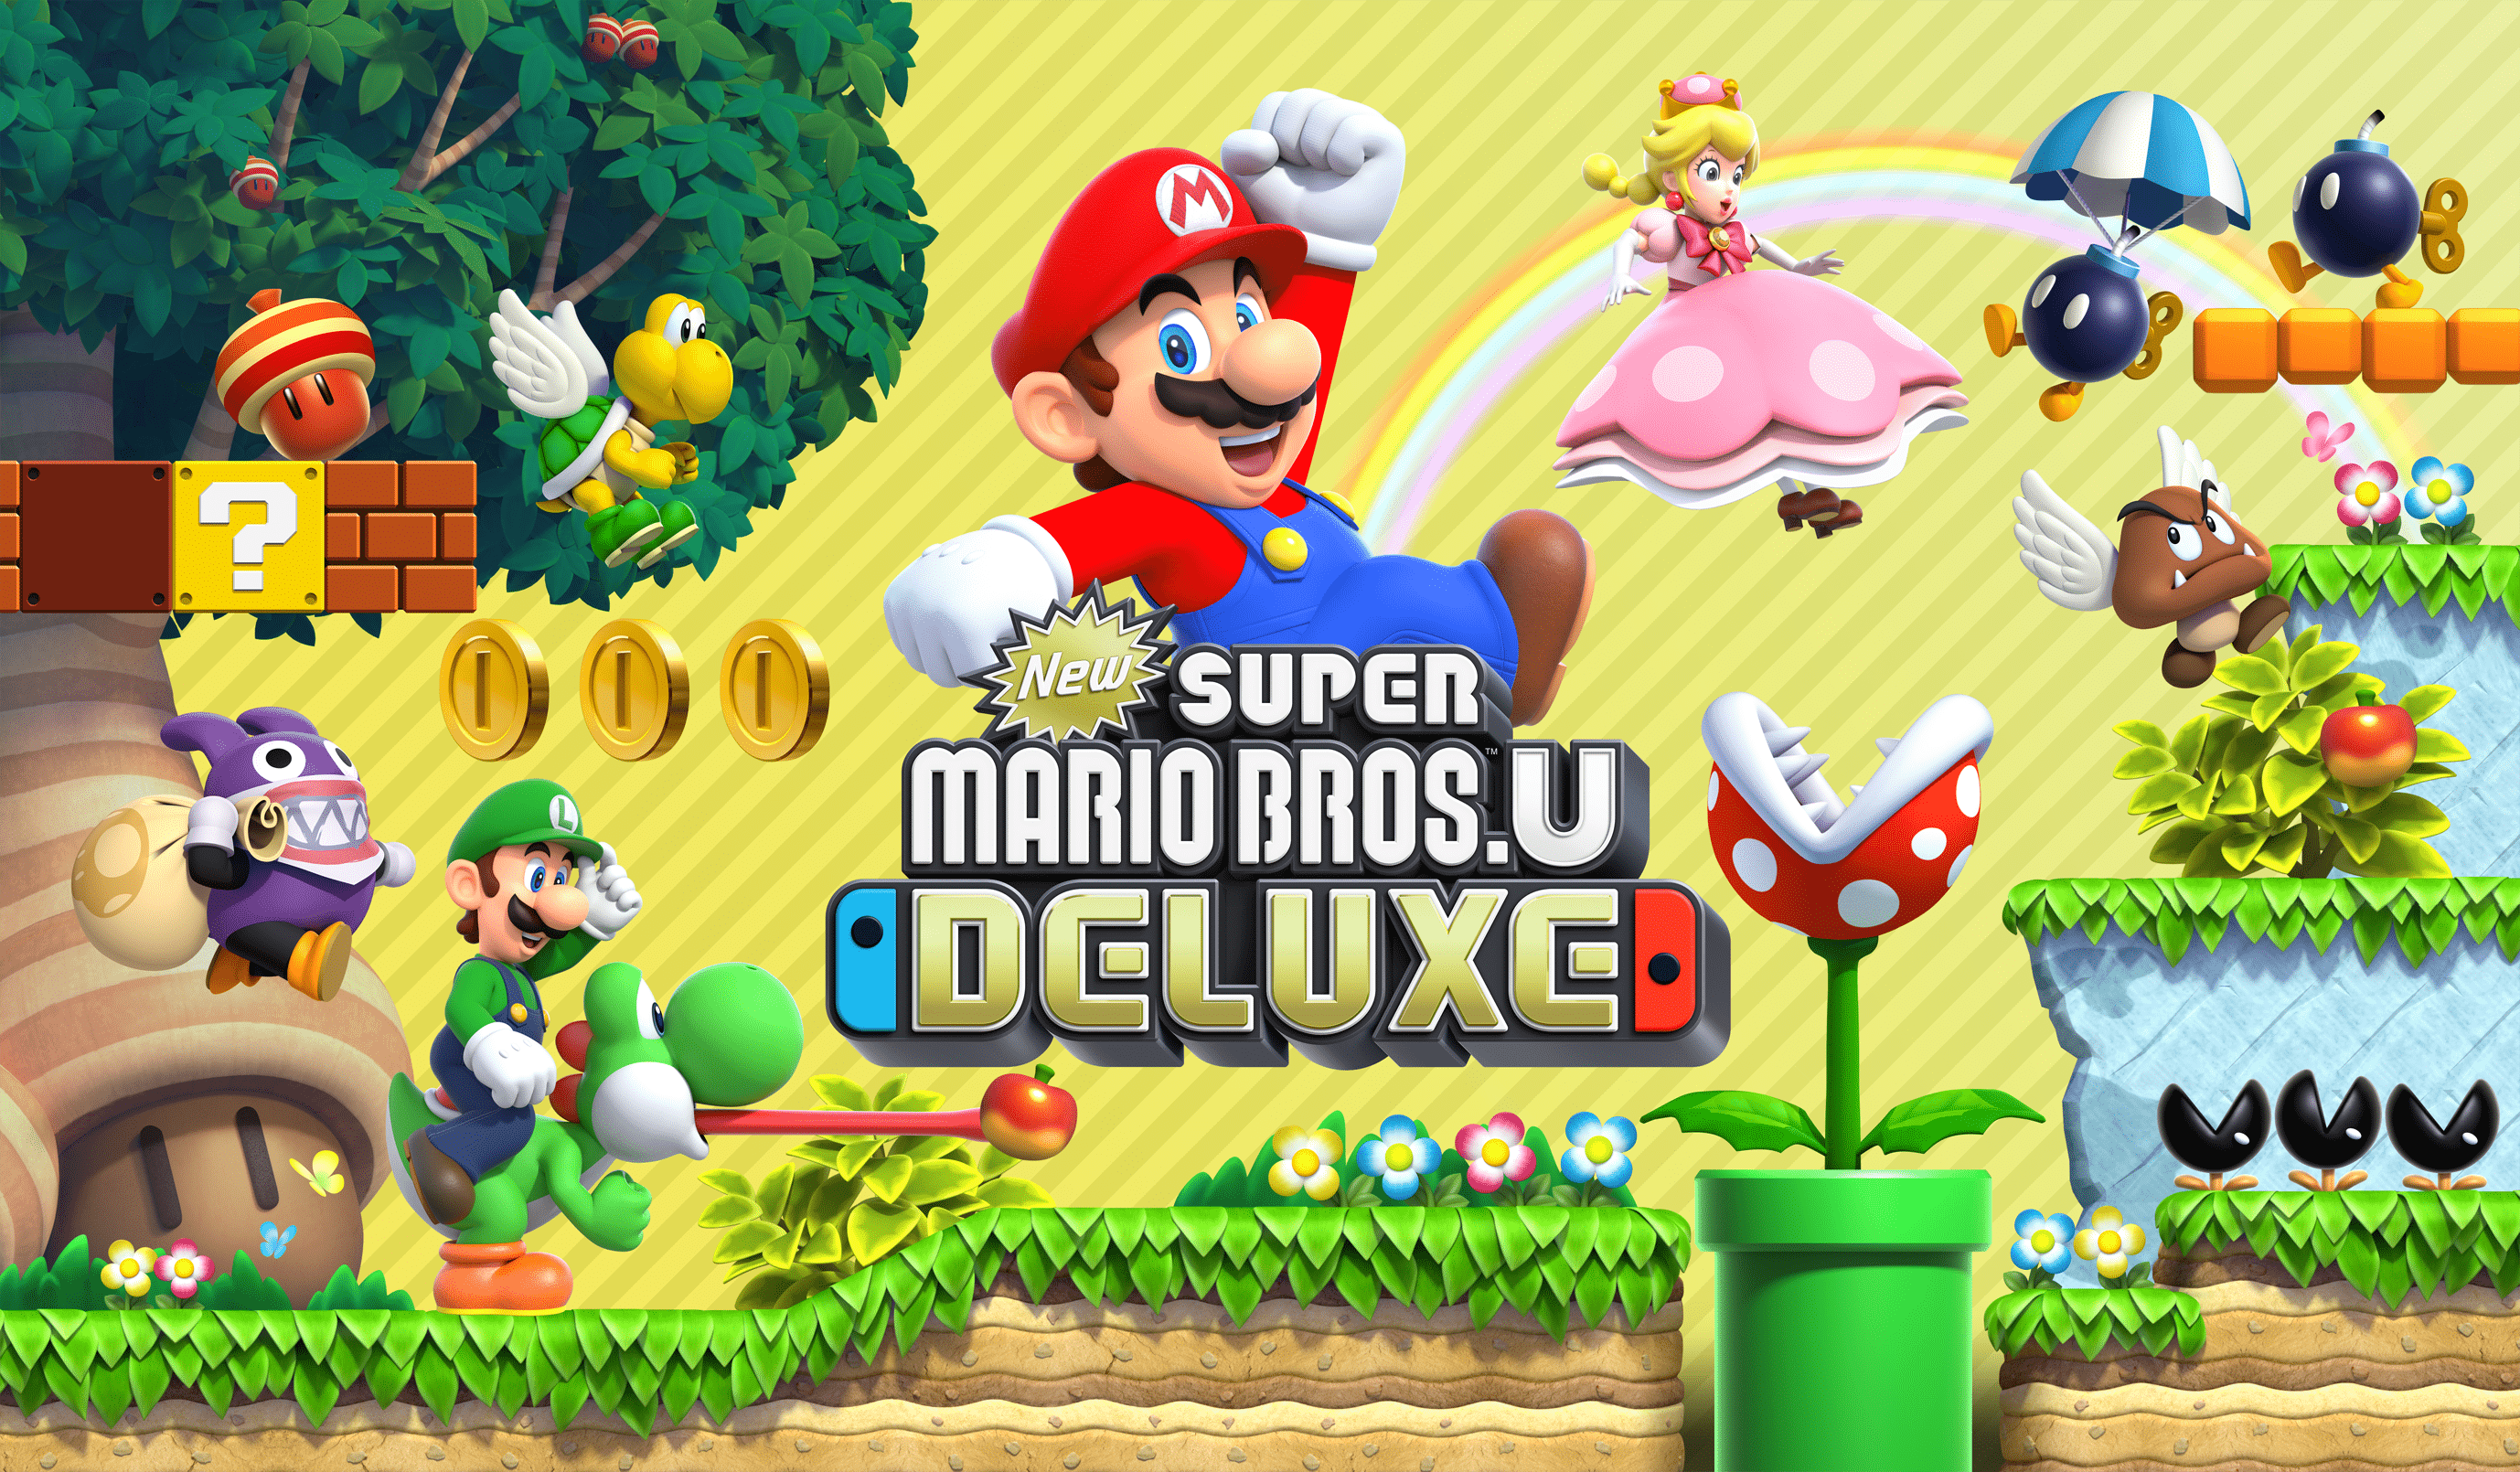 New Super Mario Bros. U Deluxe - The definitive Mario platforming experience is back with even more content, including new characters, power-ups, and courses. - Super Mario